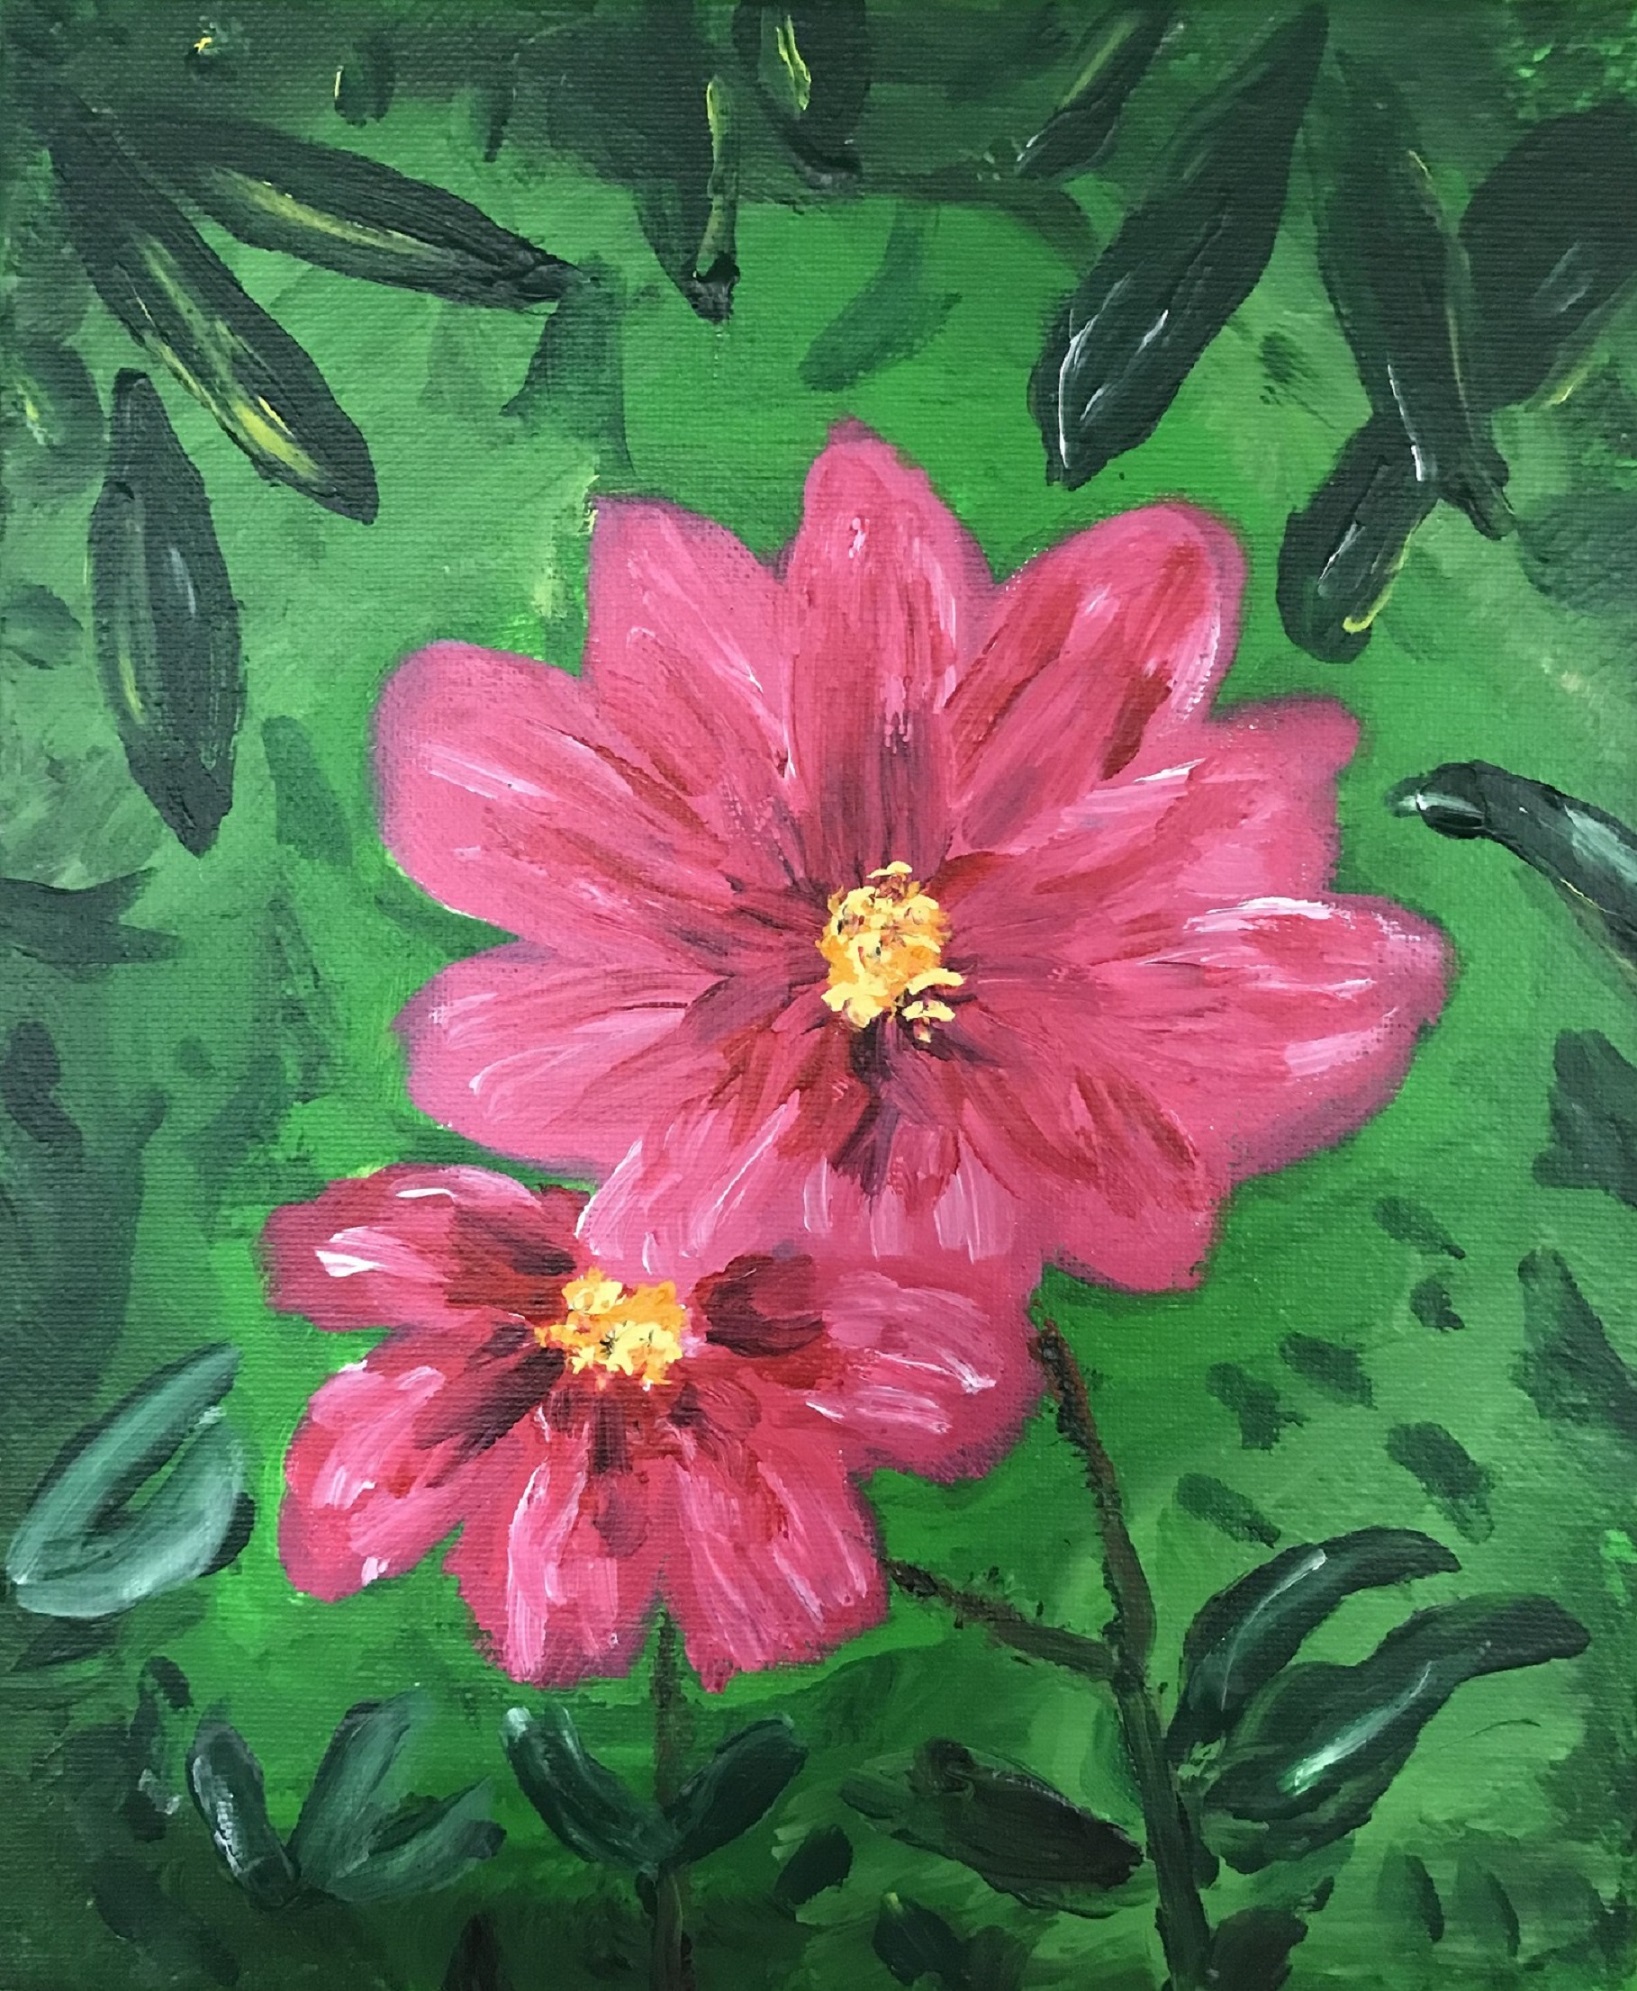 Montana Webster (Year 6) - The pink flower